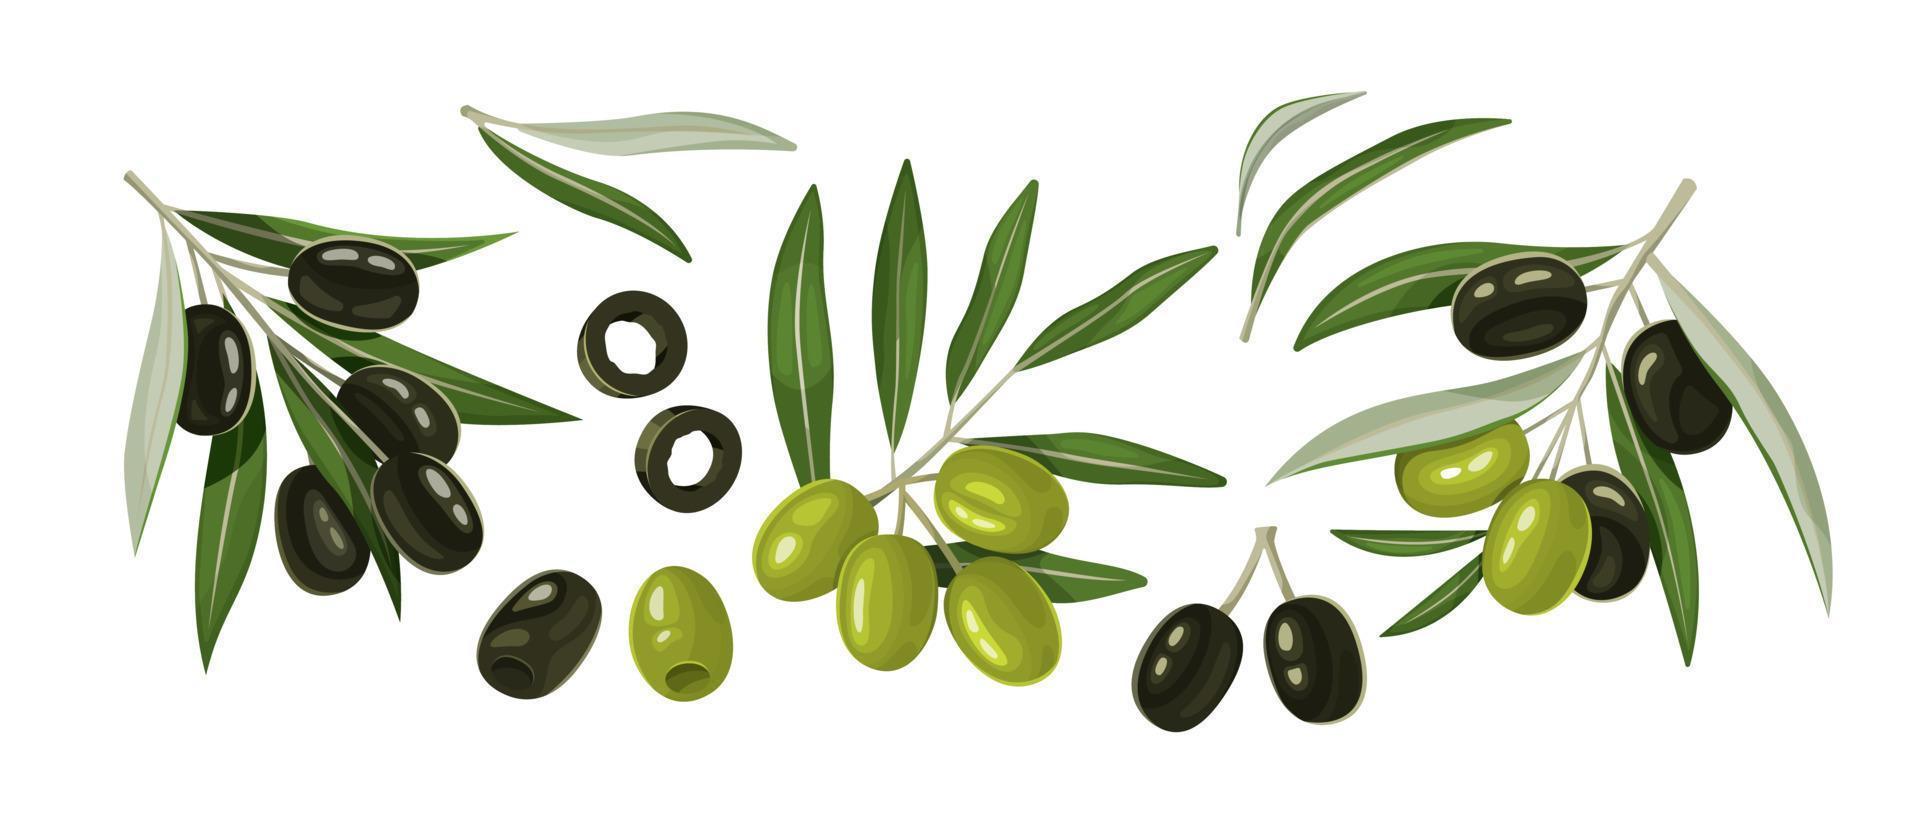 Black and green olives and branches isolated on white background. vector